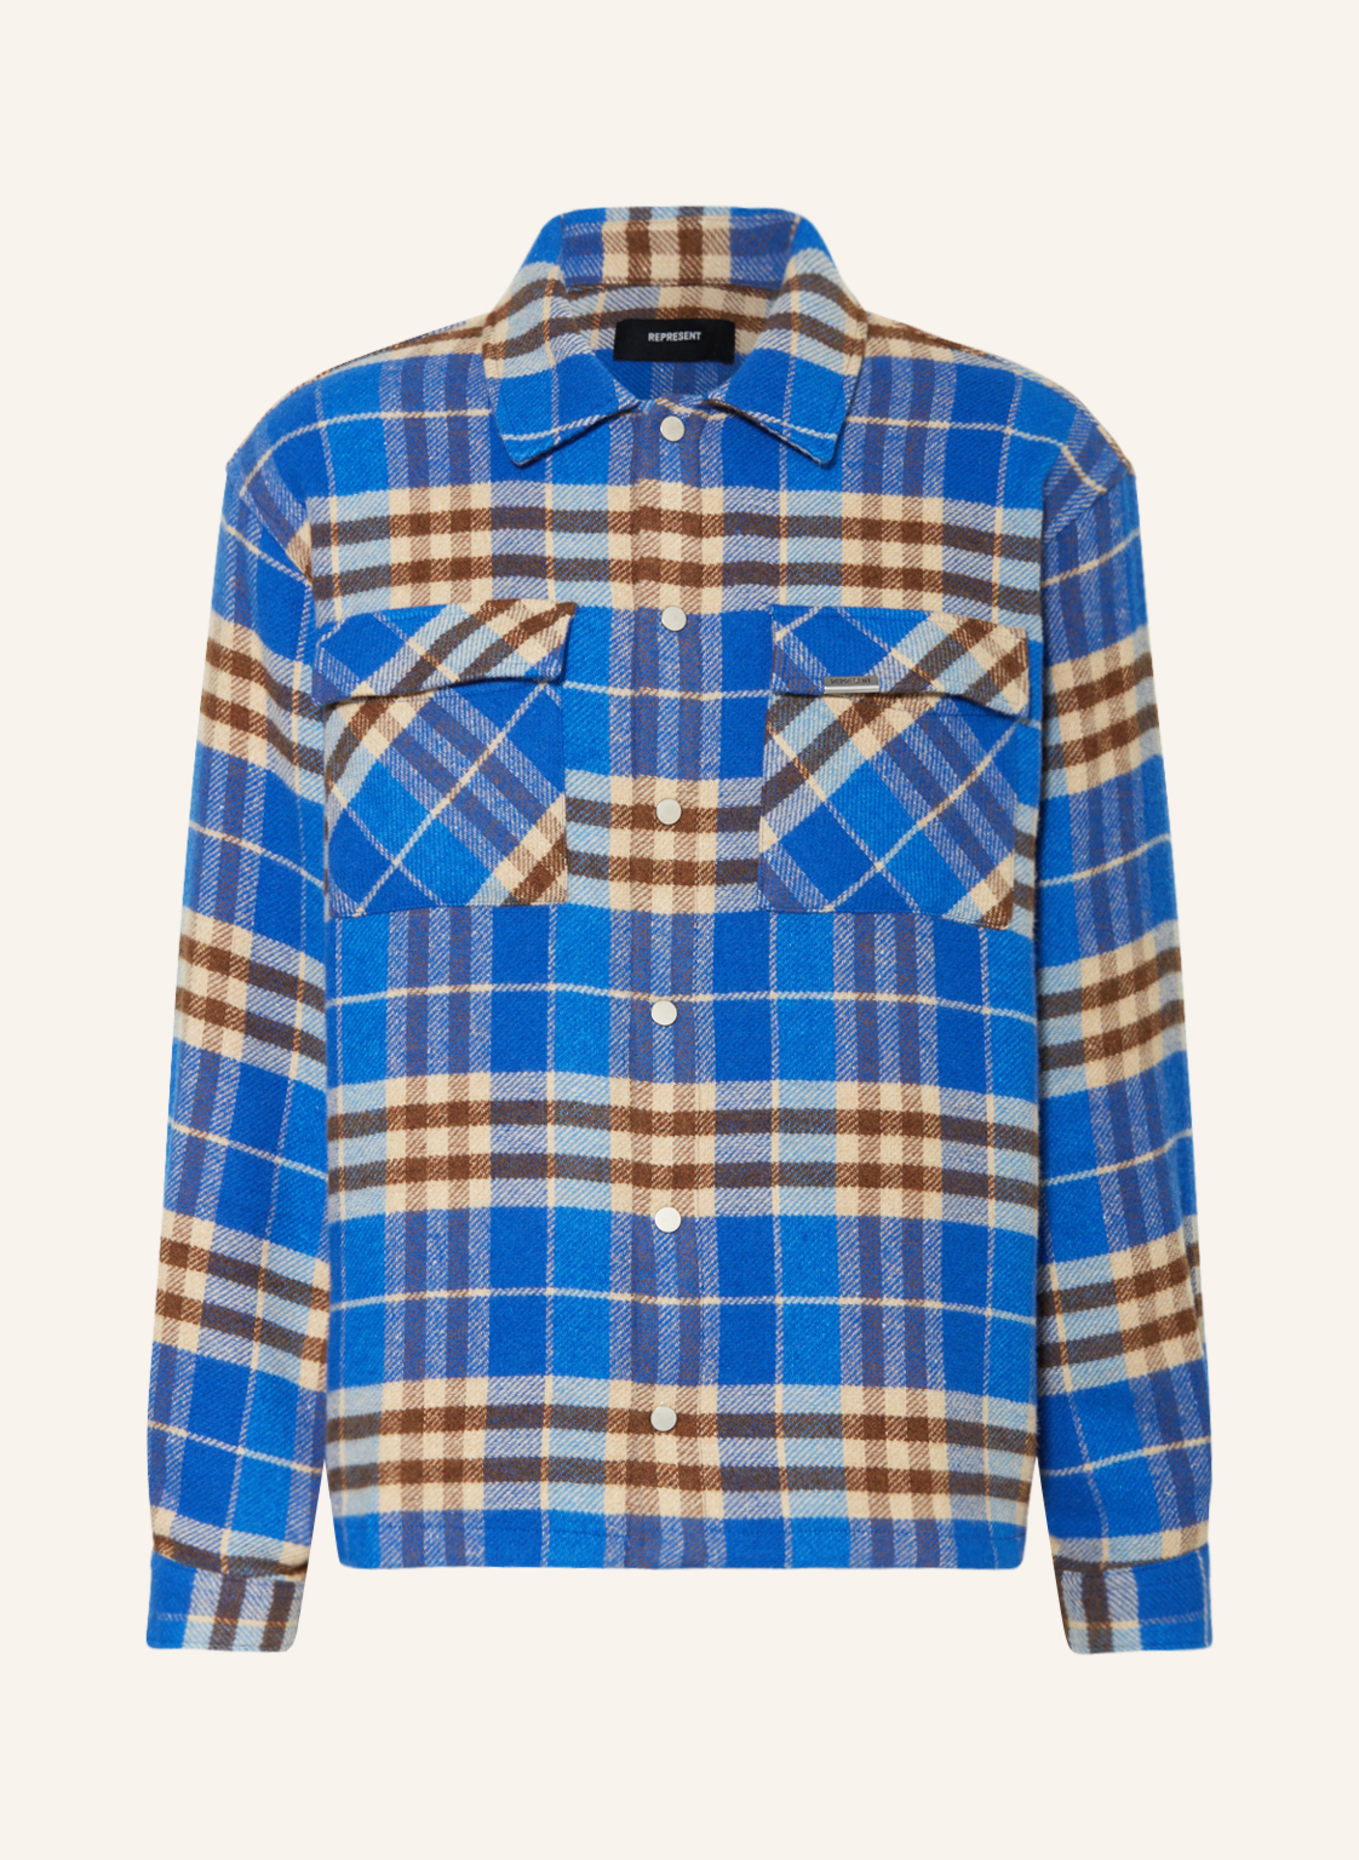 REPRESENT Overshirt, Color: BLUE/ BEIGE/ BROWN (Image 1)